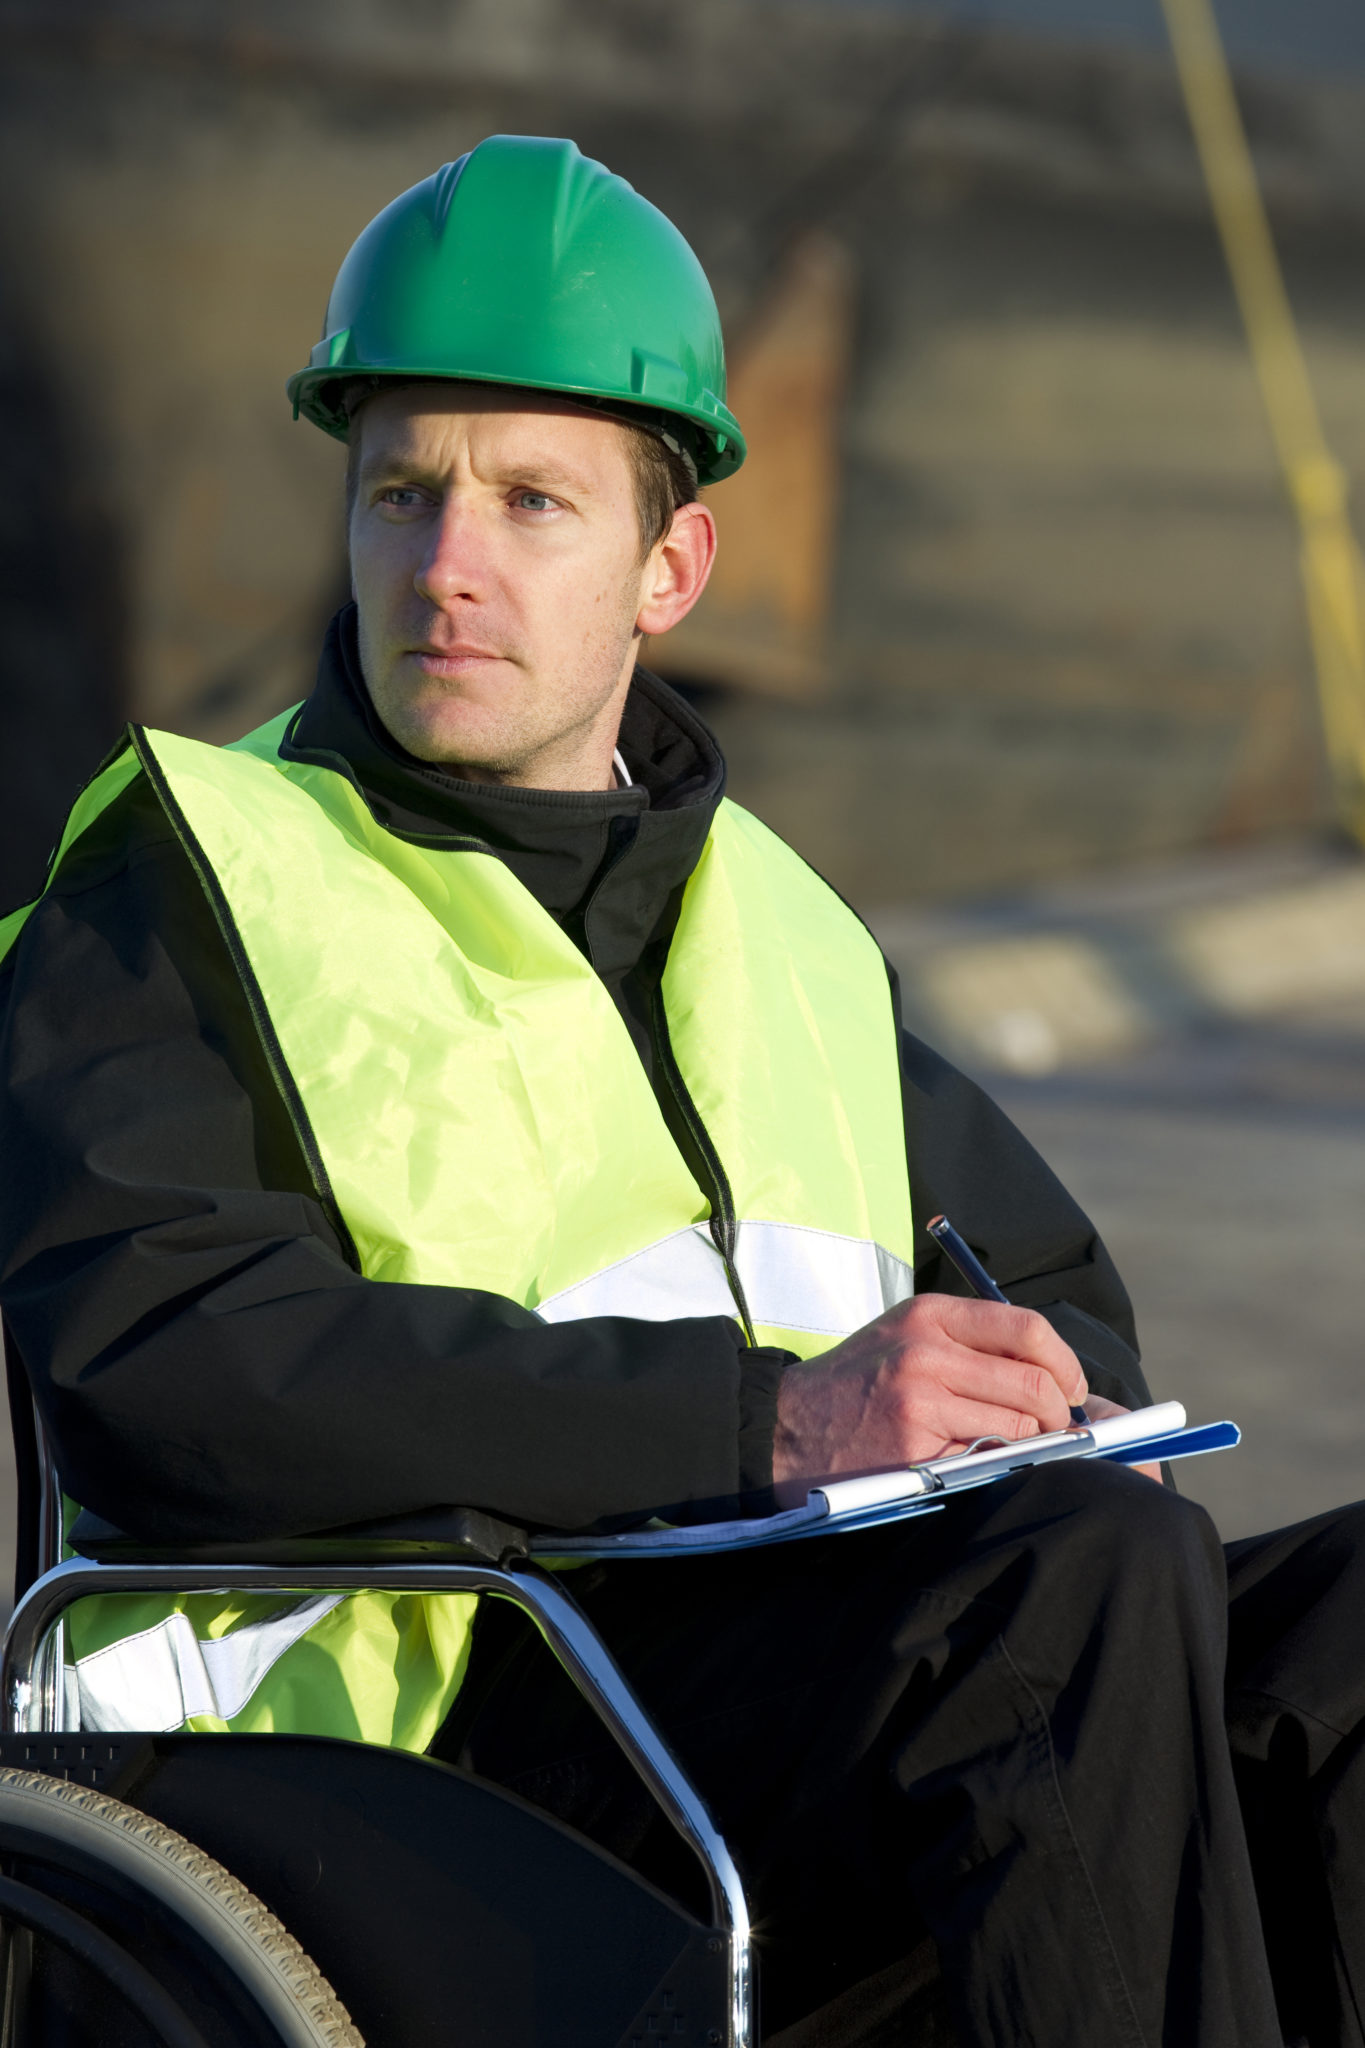 Construction supervisor in wheelchair, wearing safety vest and writing on notepad at construction site